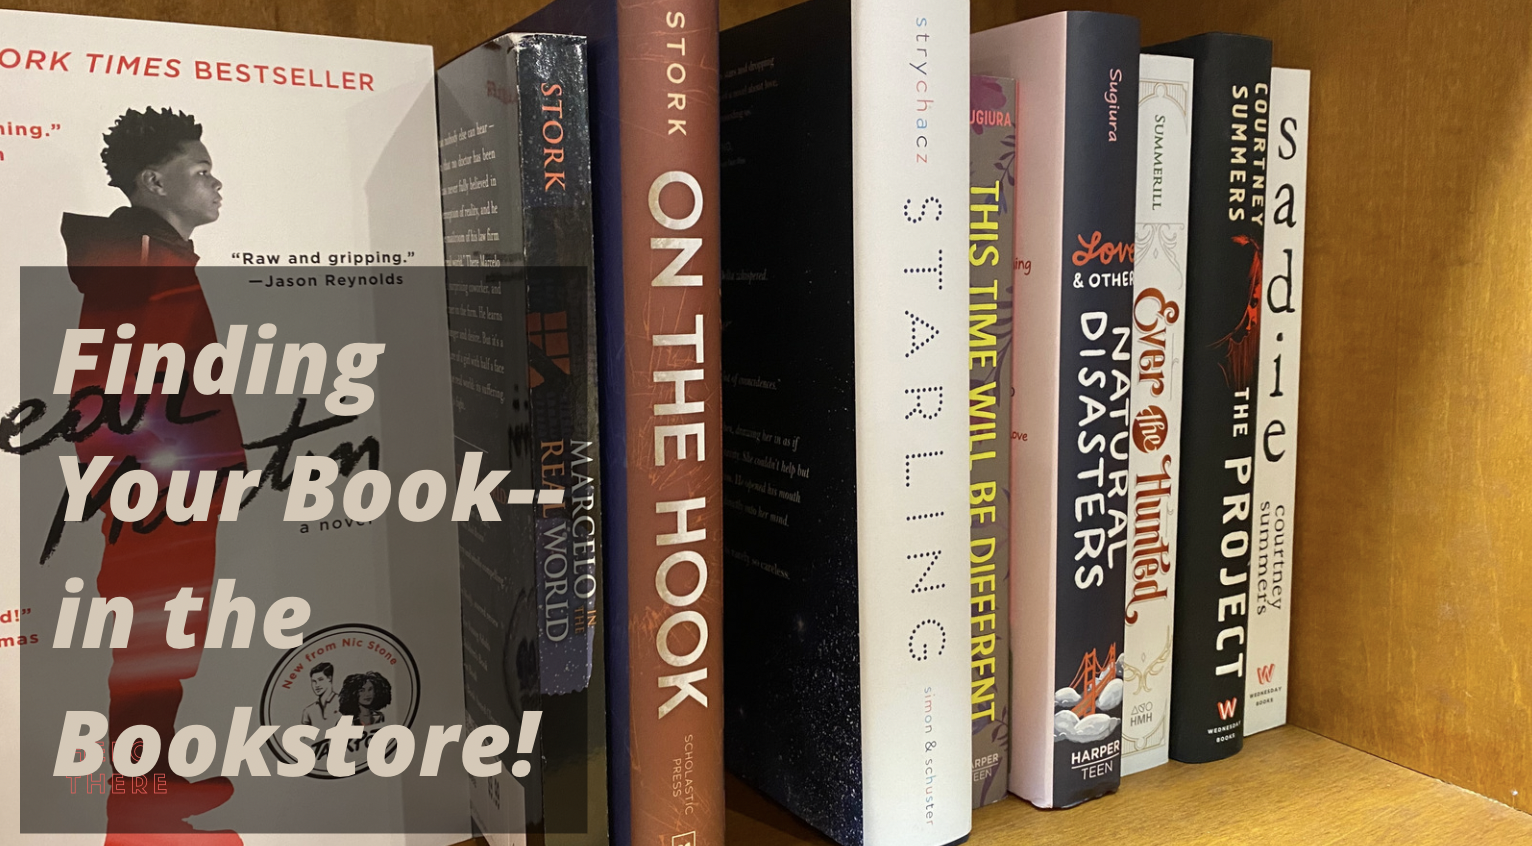 Title: Finding Your Book--in the Bookstore overlayed on an image of books on a bookstore shelf